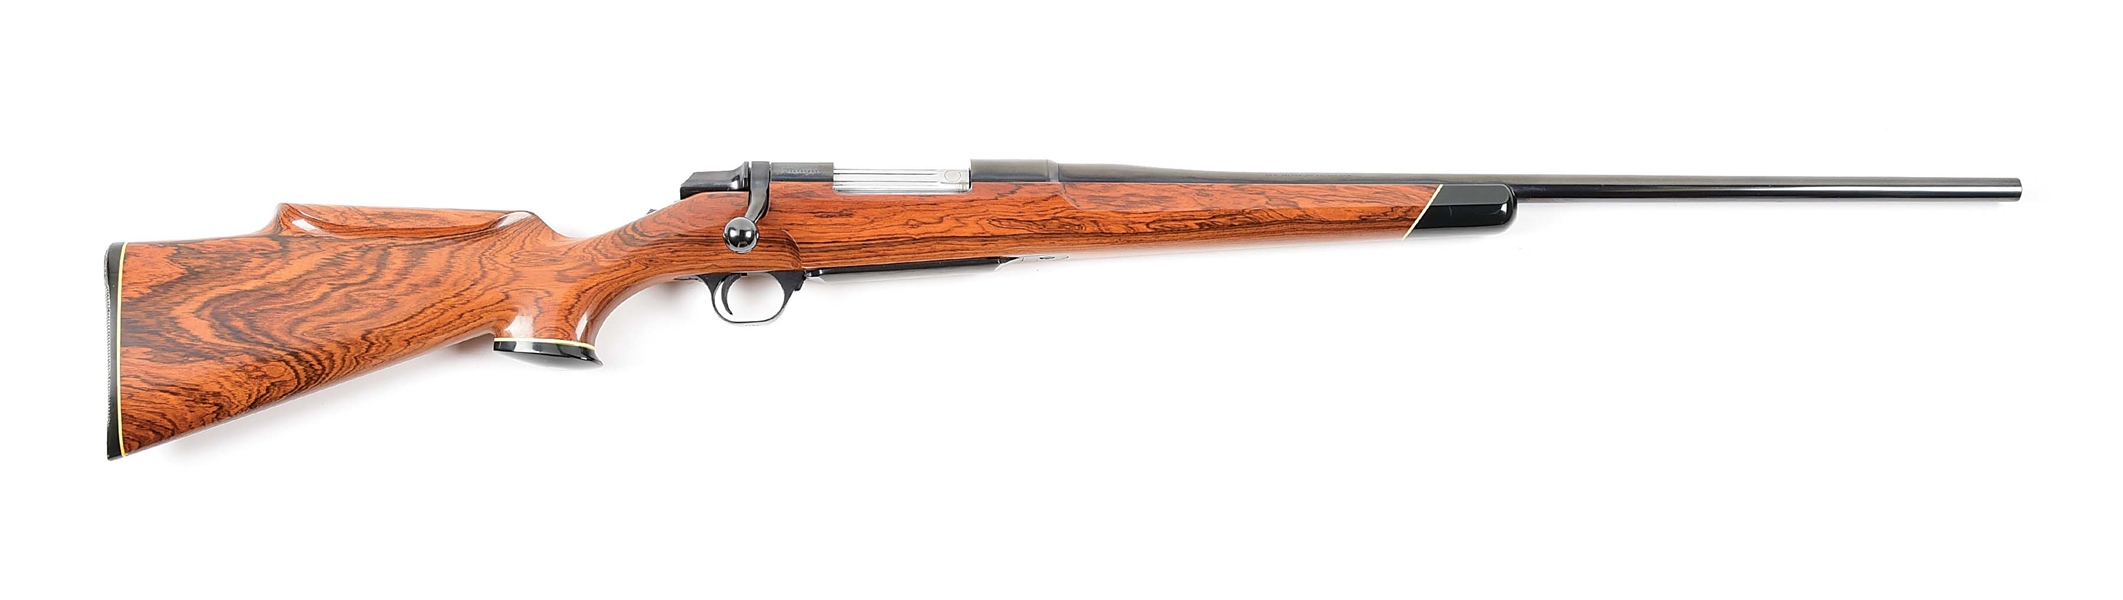 (M) BROWNING BBR BOLT ACTION RIFLE WITH ROSEWOOD HONDRUAN/ DALBERGIA STEVENSONII STOCK.